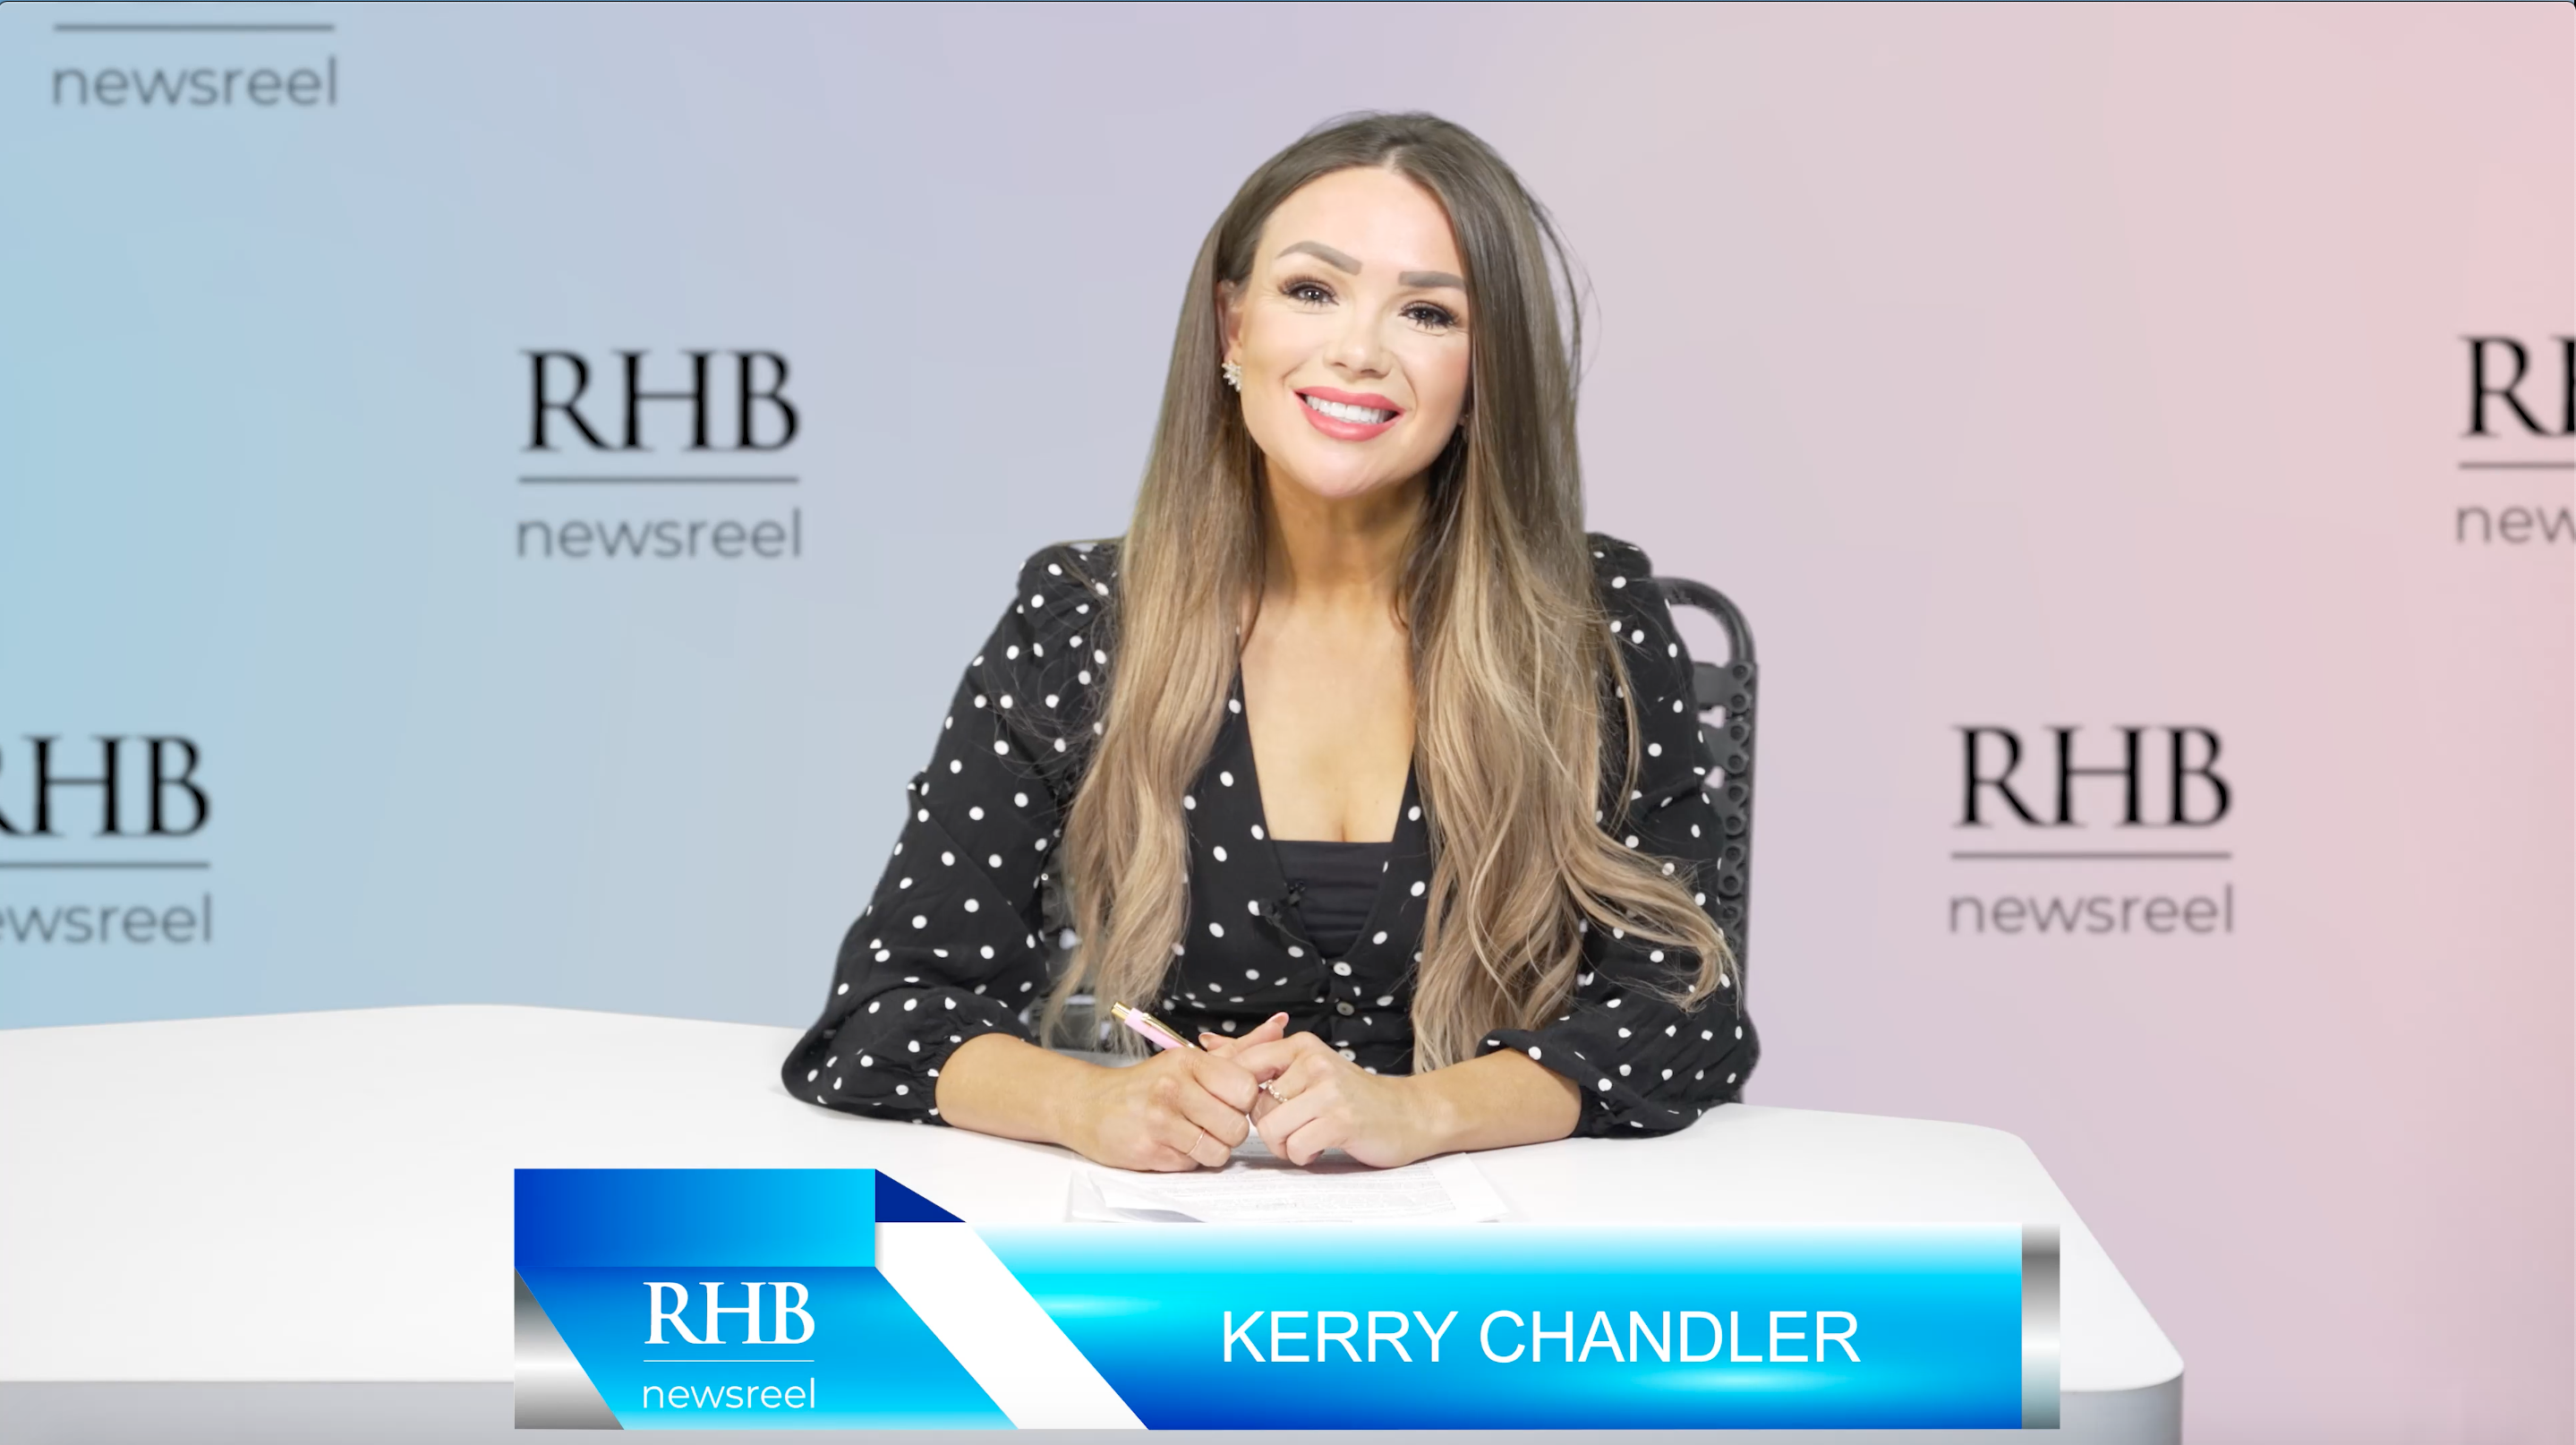 WATCH THE NEW RHB NEWSREEL WITH KERRY CHANDLER